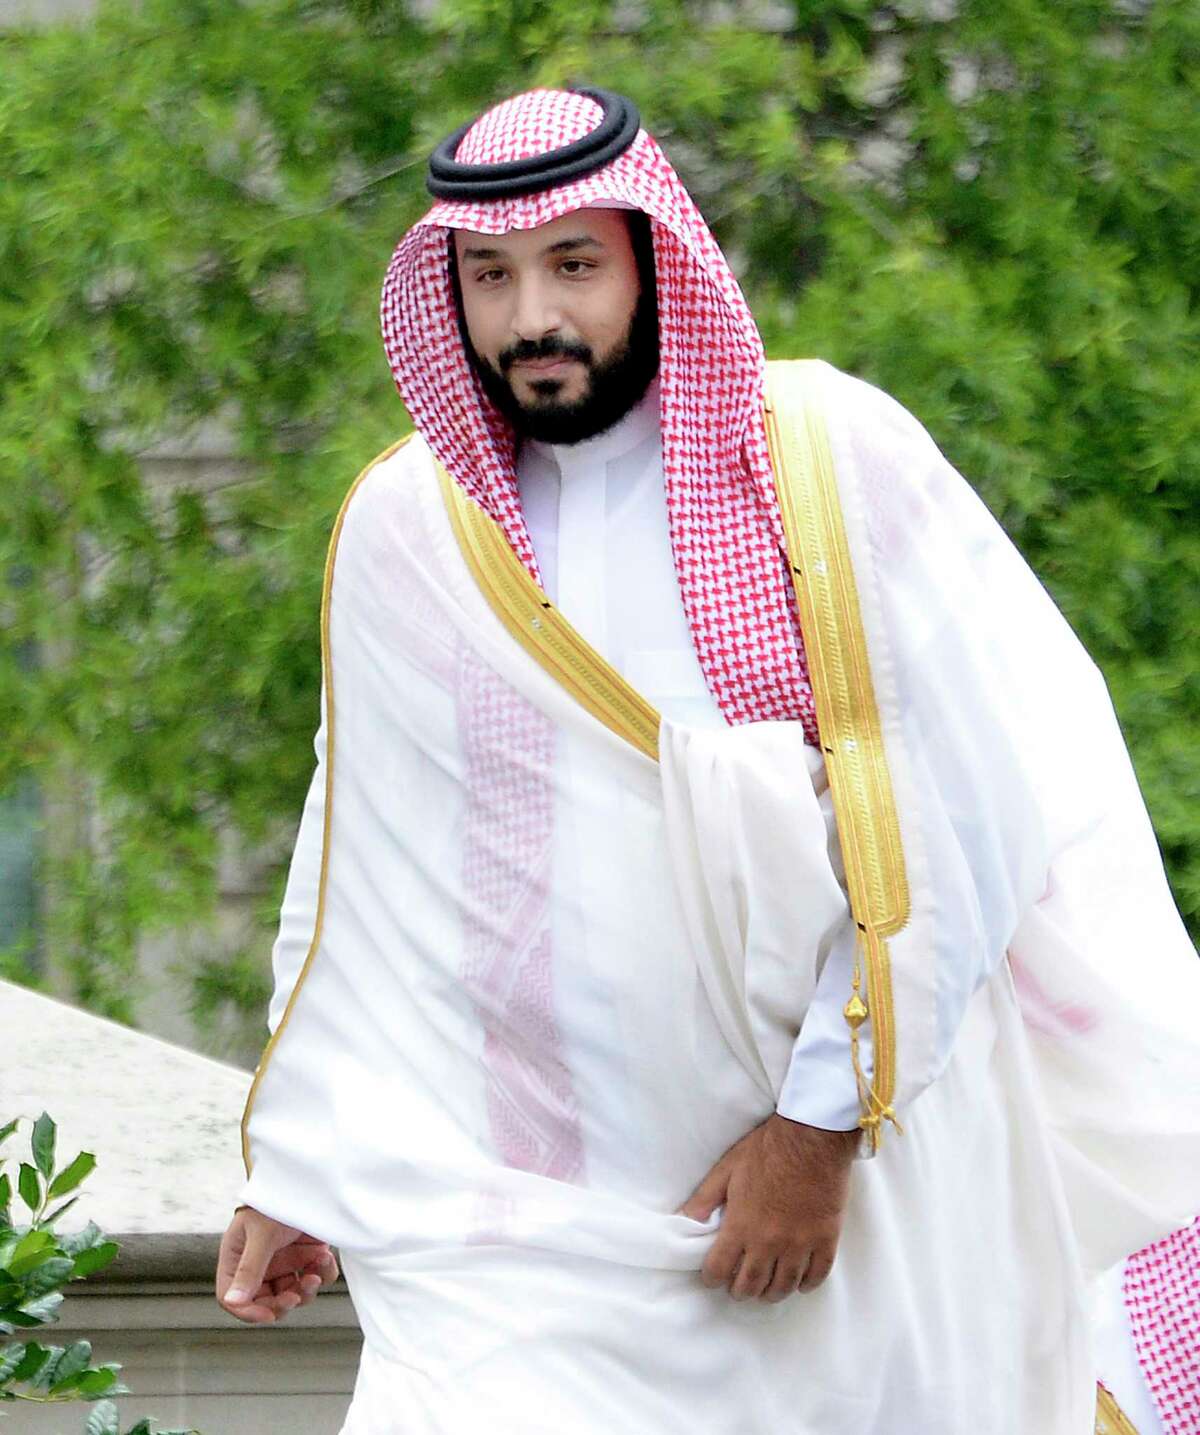 Mohammed bin Salman's rise comes as shifts in global power structures are affecting the oil market. Salman's rise comes as shifting global power structures complicate the once-straightforward relationships and dynamics that drove the oil market. of Saudi Arabia arrives at the White House to attend a meeting with President Barack Obama on June 17, 2016 in Washington, D.C. Saudi Arabia's King Salman has appointed Mohammed bin Salman as crown prince. (Olivier Douliery/Abaca Press/TNS)